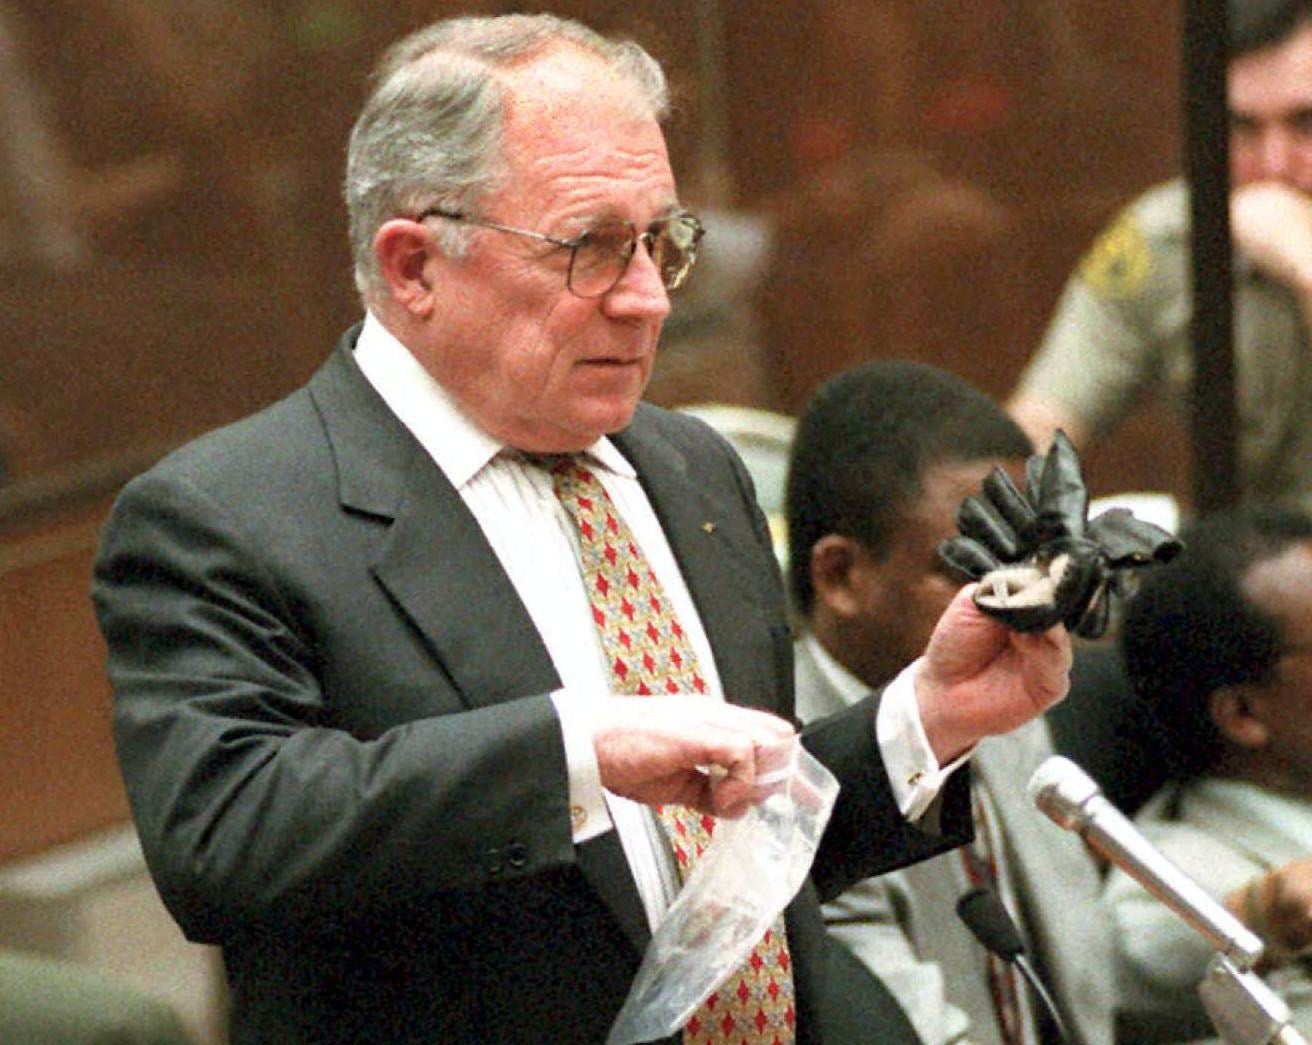 F Lee Bailey Criminal Defence Lawyer Who Defended Oj Simpson The